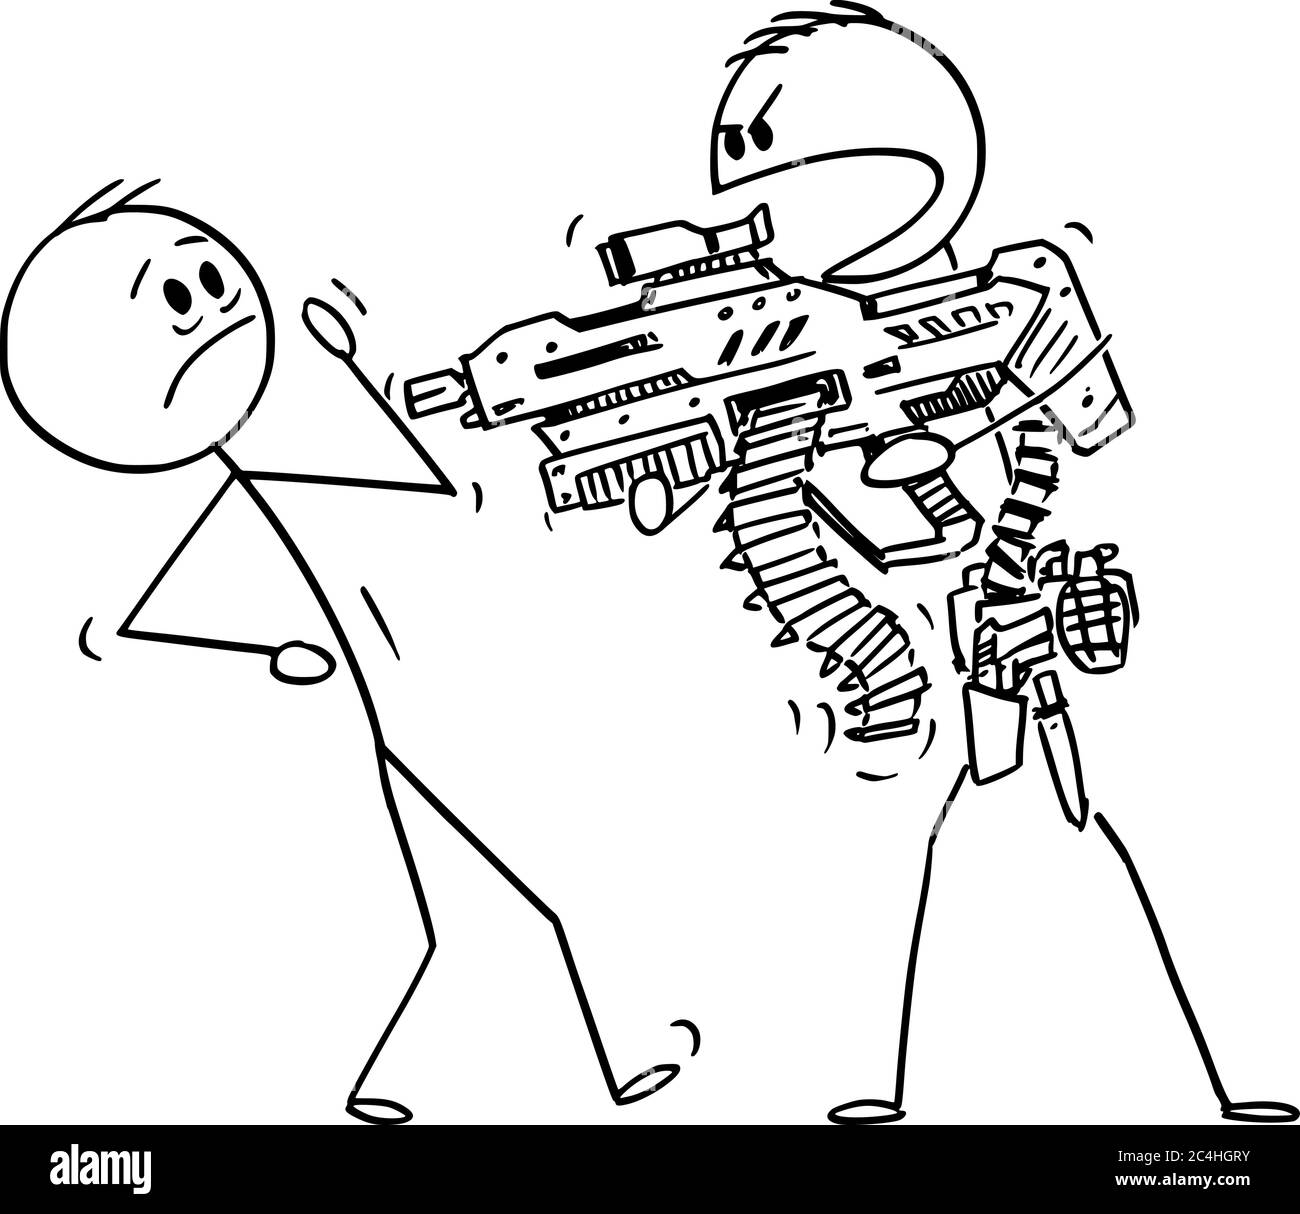 Vector cartoon stick figure drawing conceptual illustration of heavily armed man with generic futuristic weapon threatening unarmed man. Stock Vector